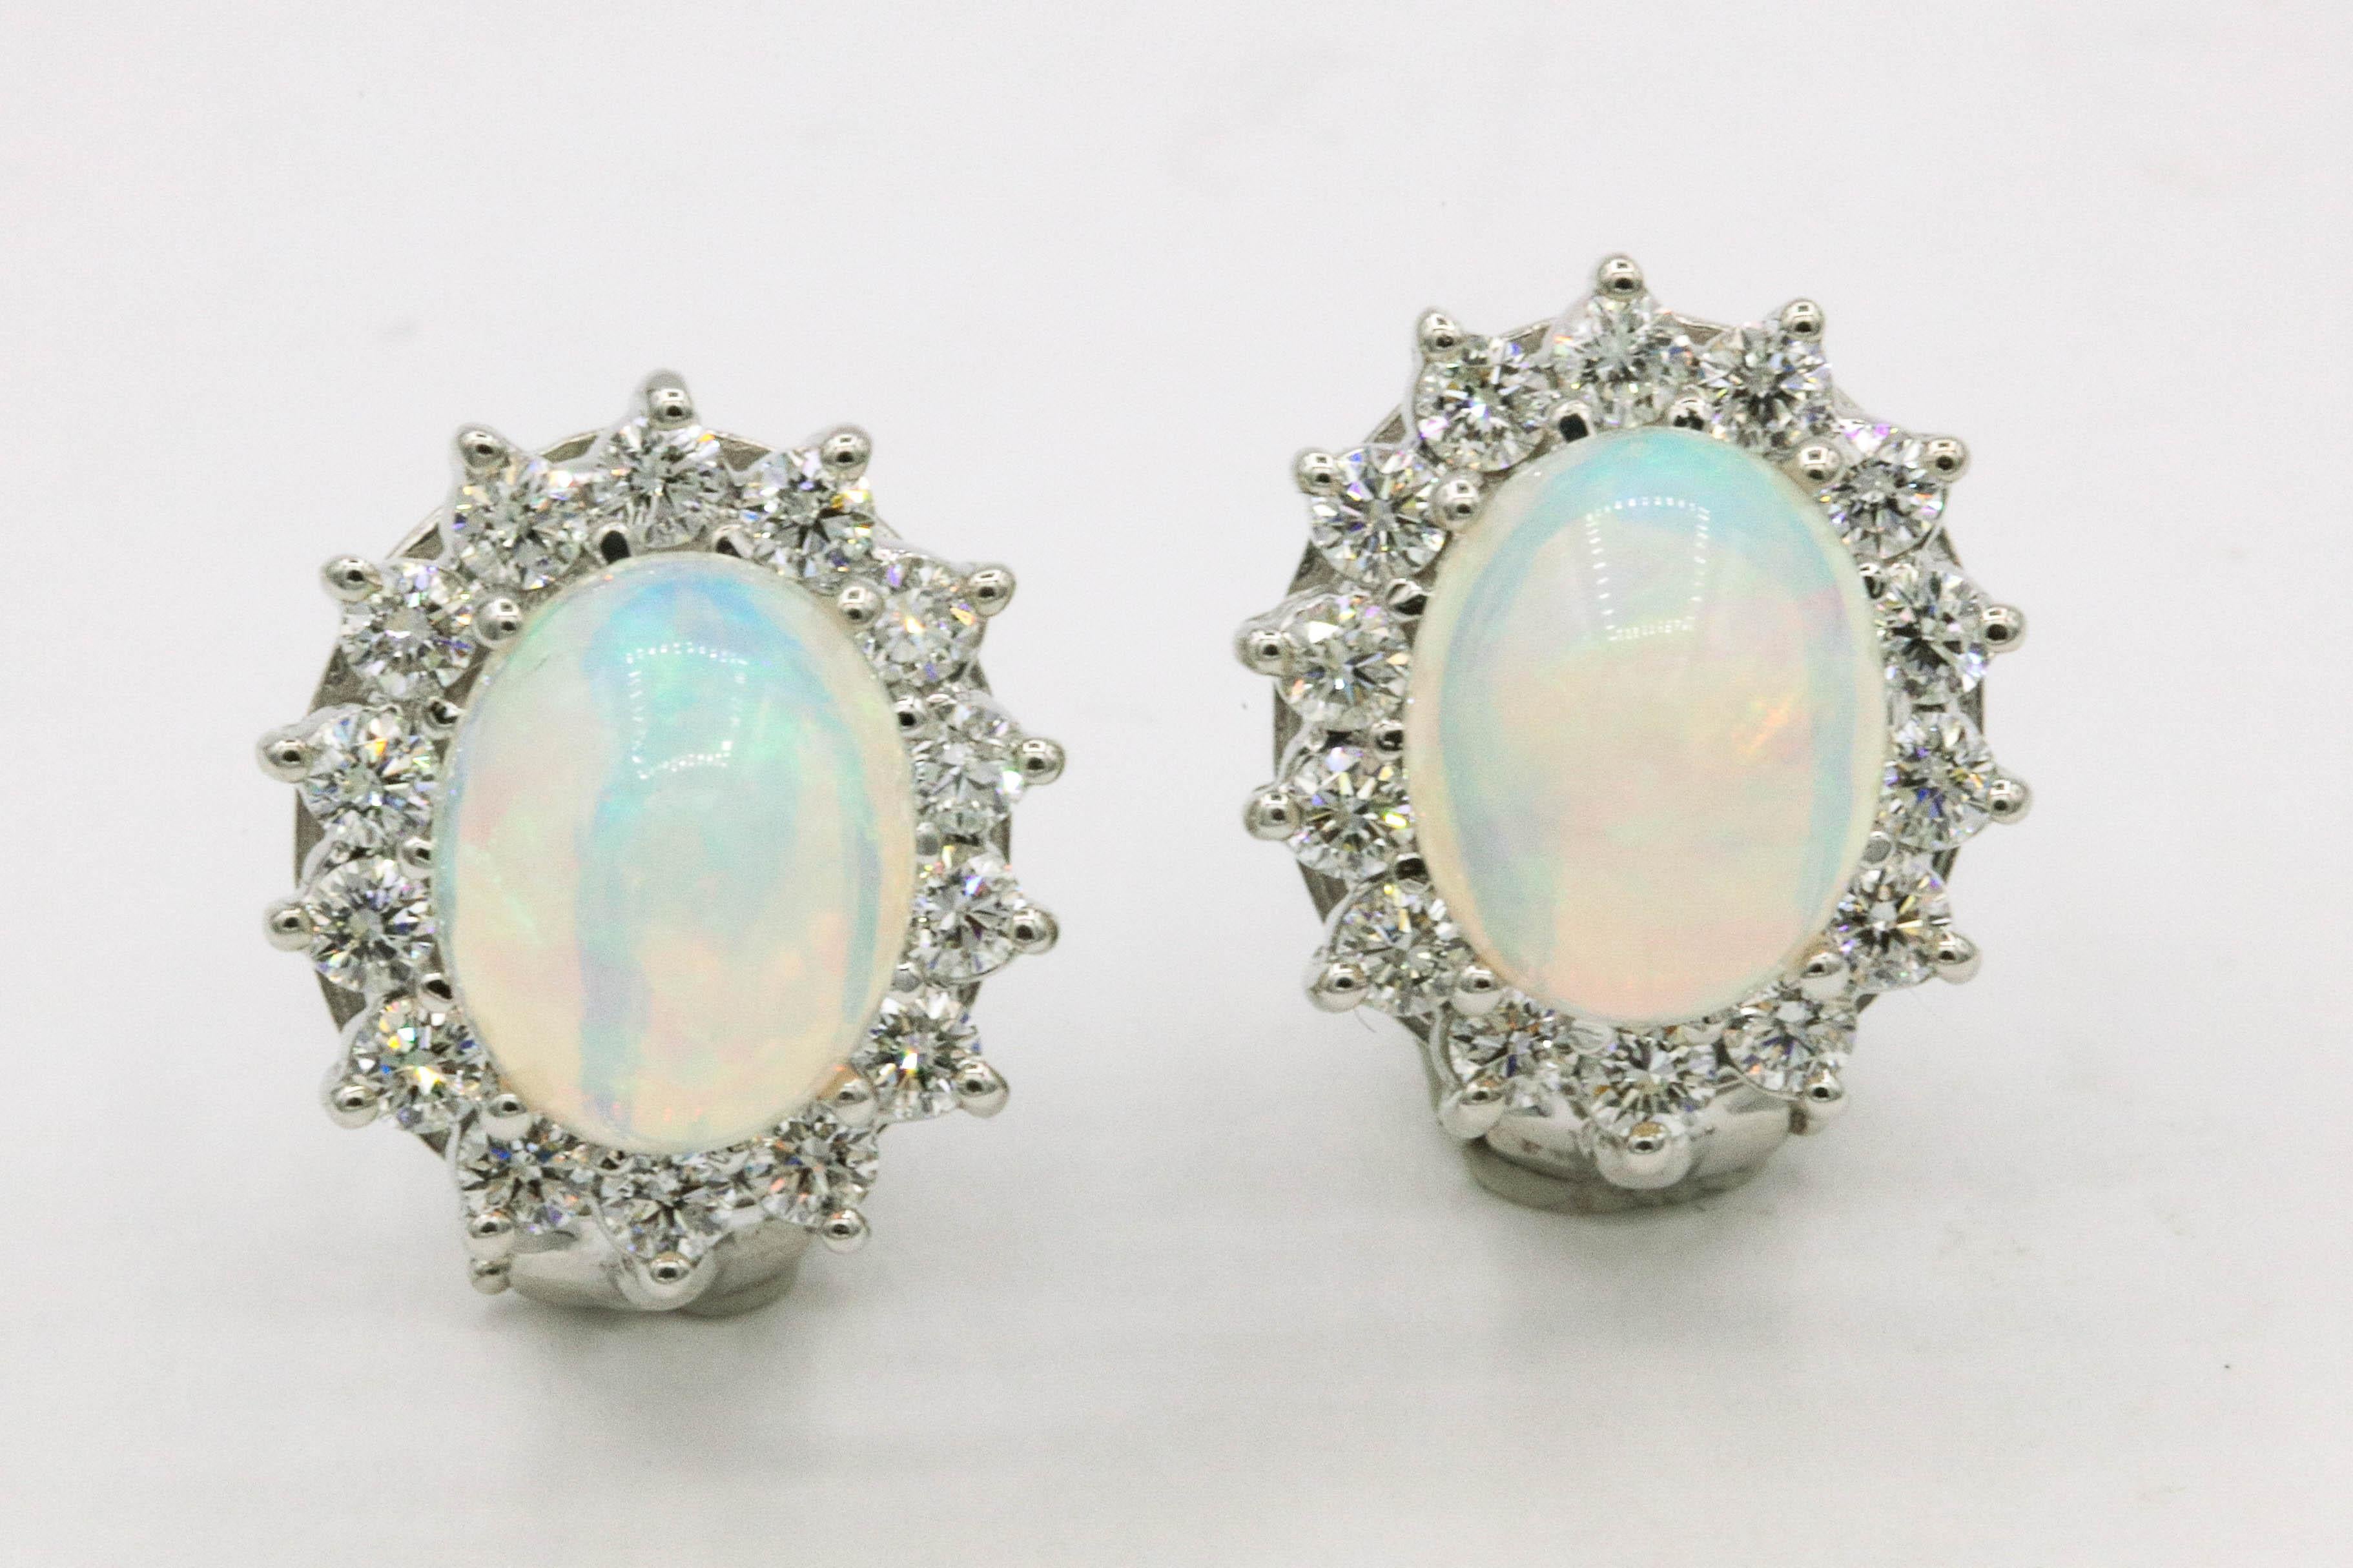 Ethiopian opal earring, 3.72 carats, flanked with a diamond floral halo weighing 1.24 carats, in 14k white gold.
Color G-H
Clarity SI